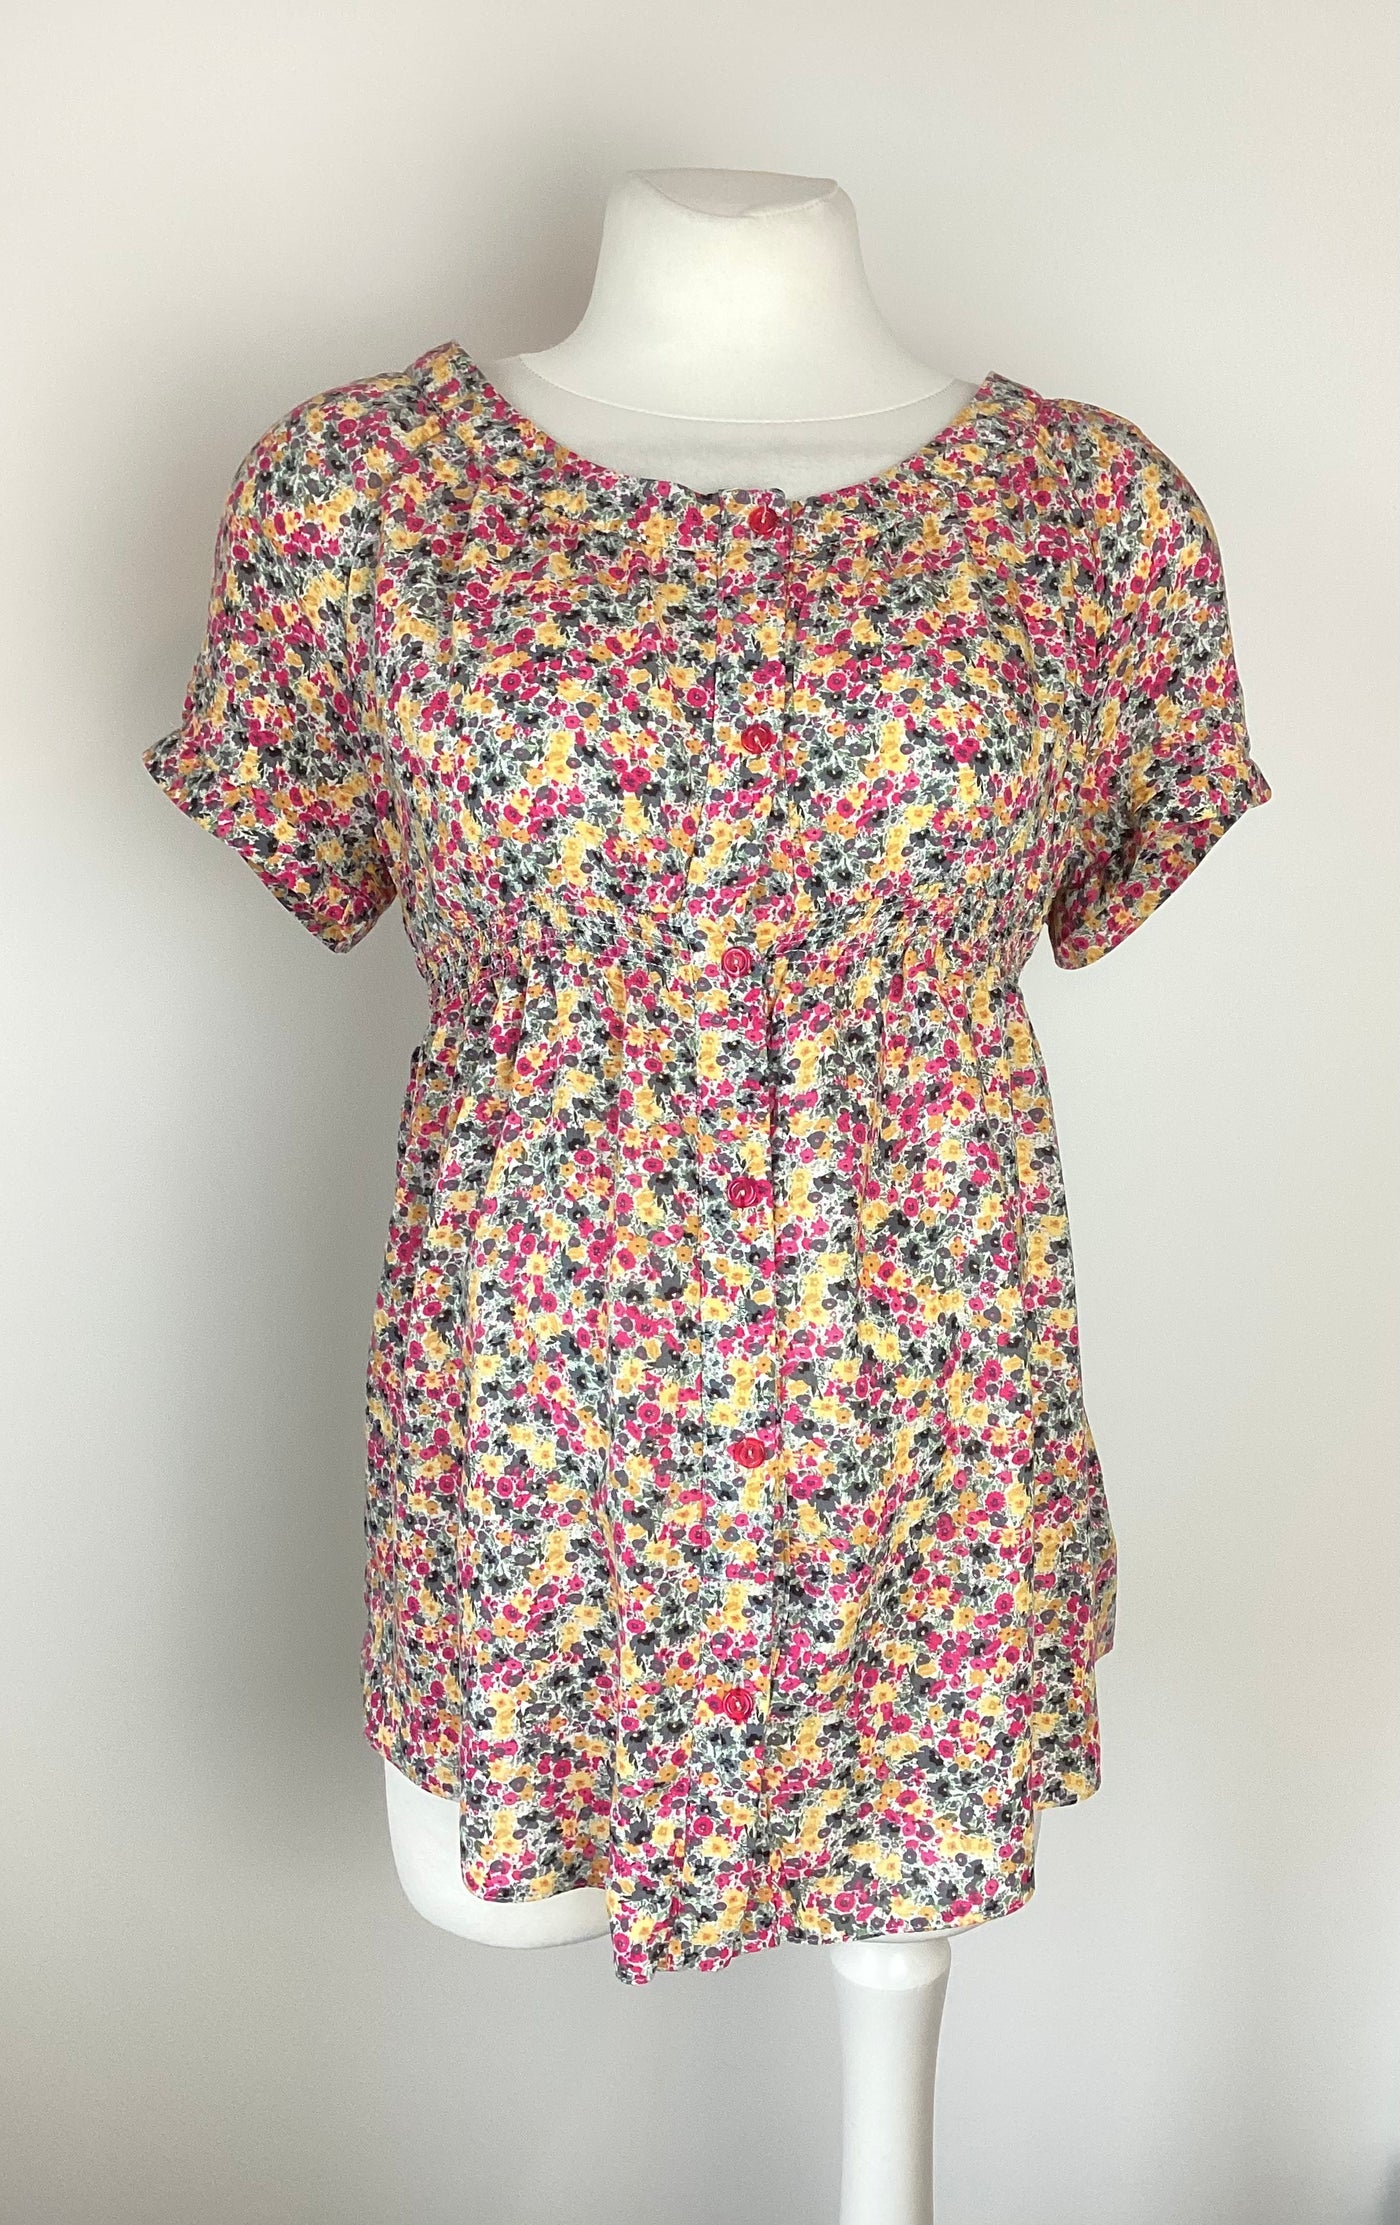 New Look Maternity pink, yellow & grey floral button front top - Size 8